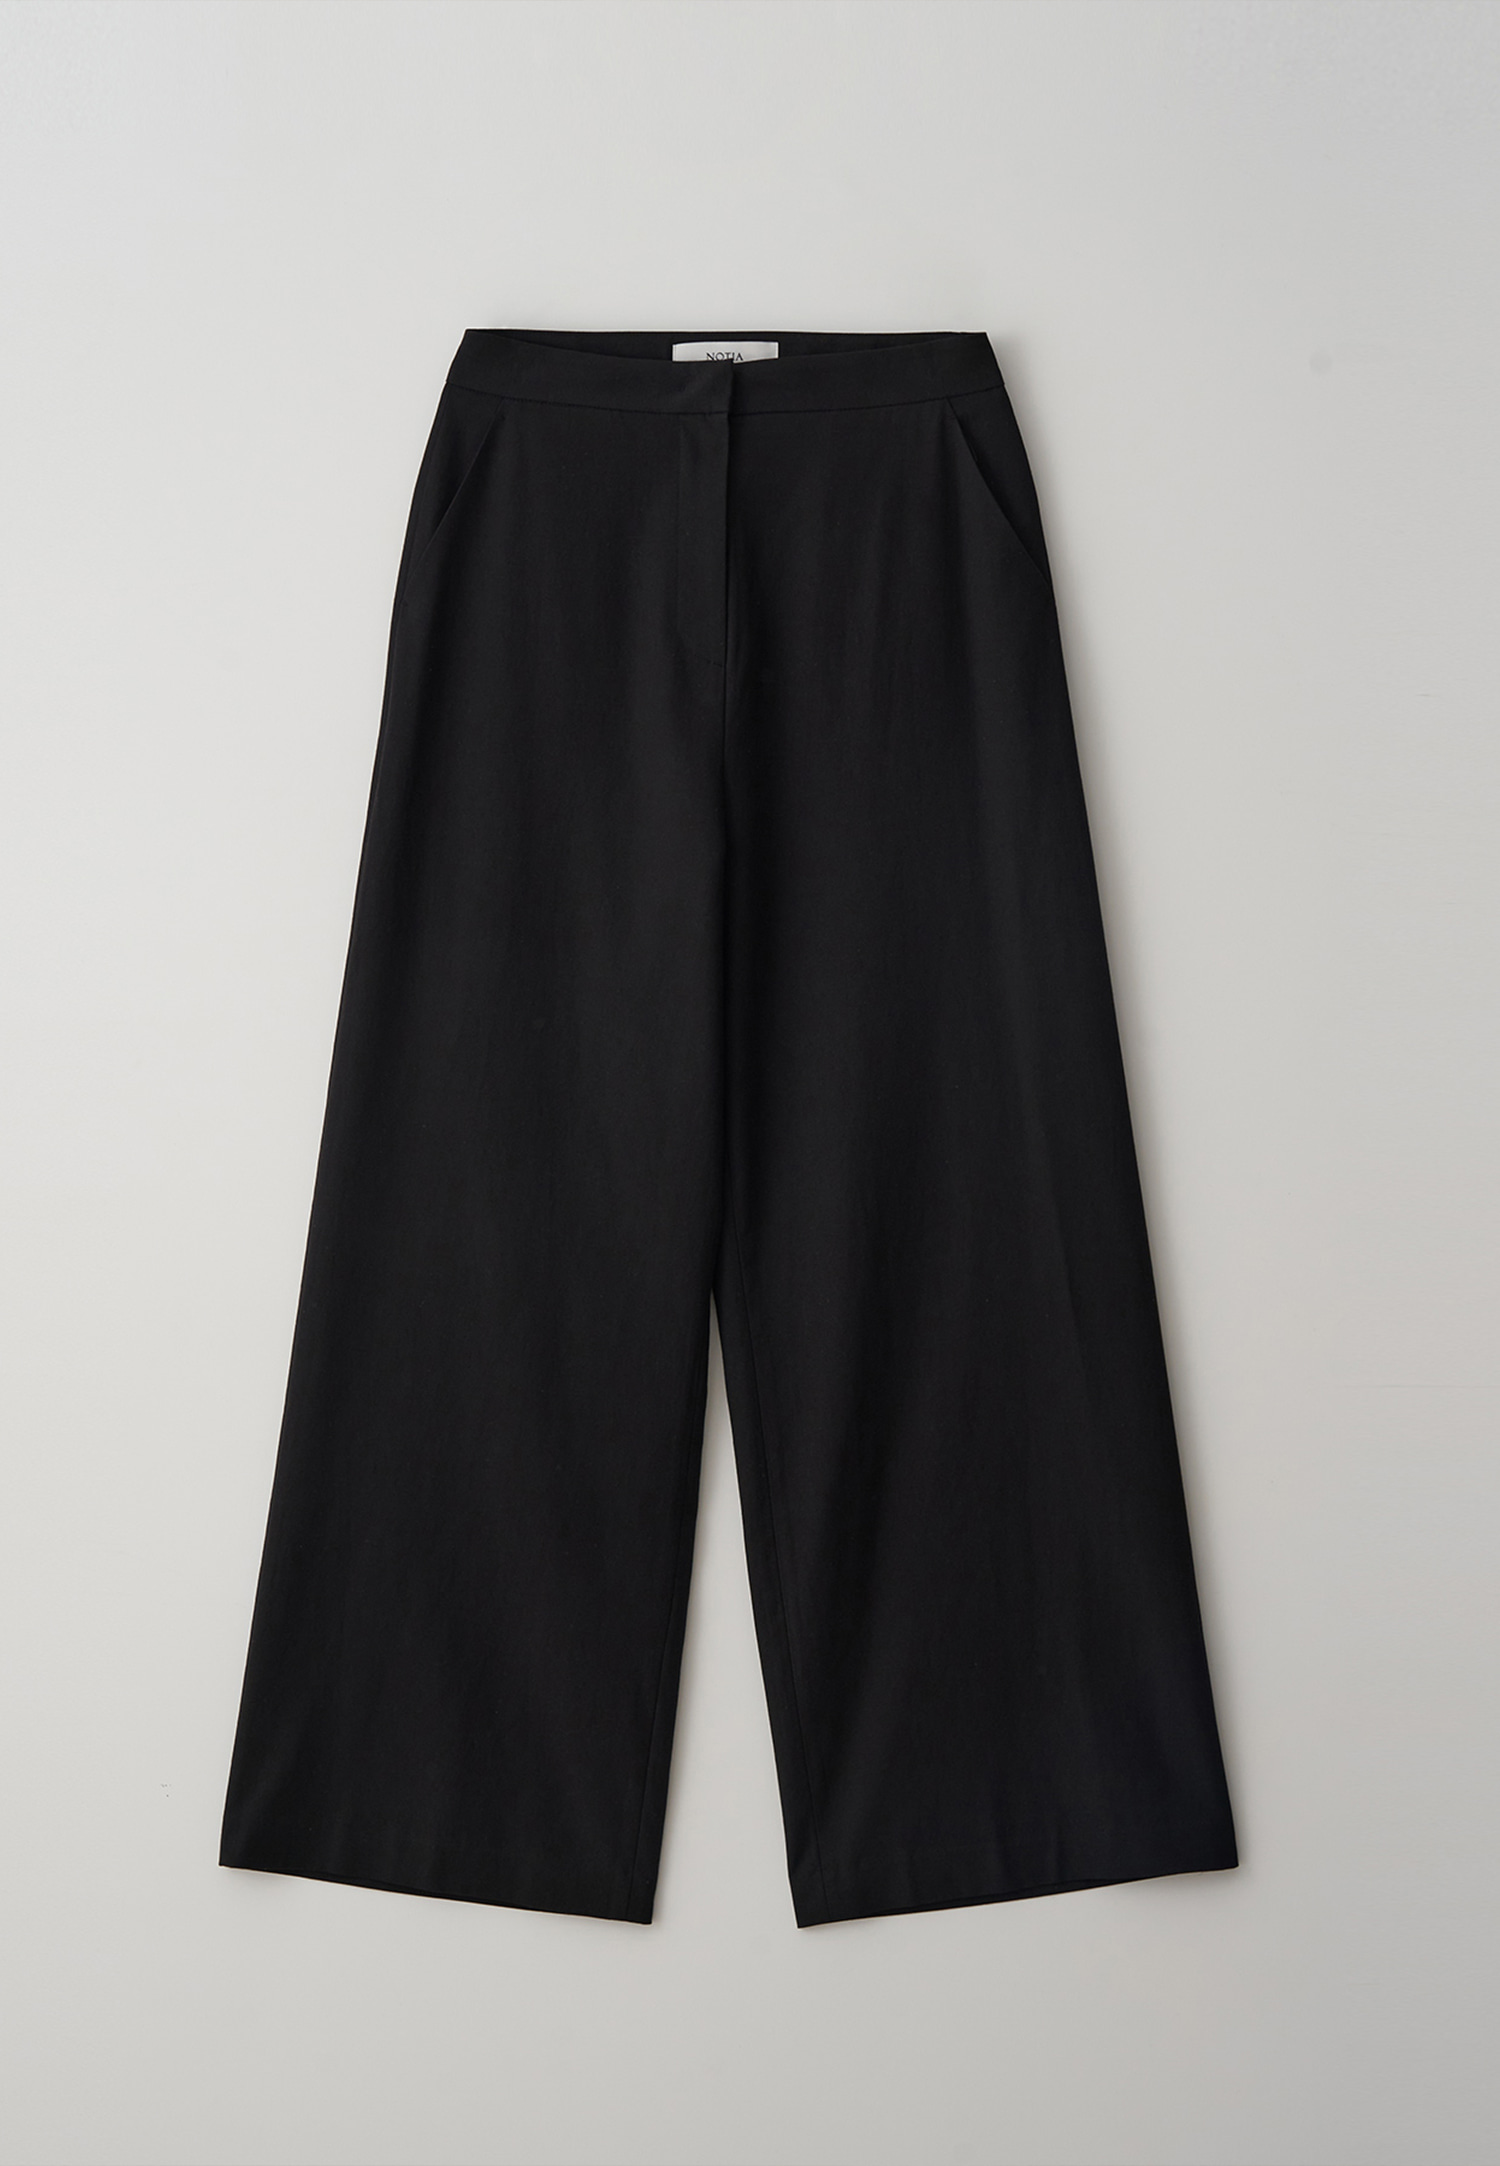 RELAXED FIT COTTON PANTS - BLACK